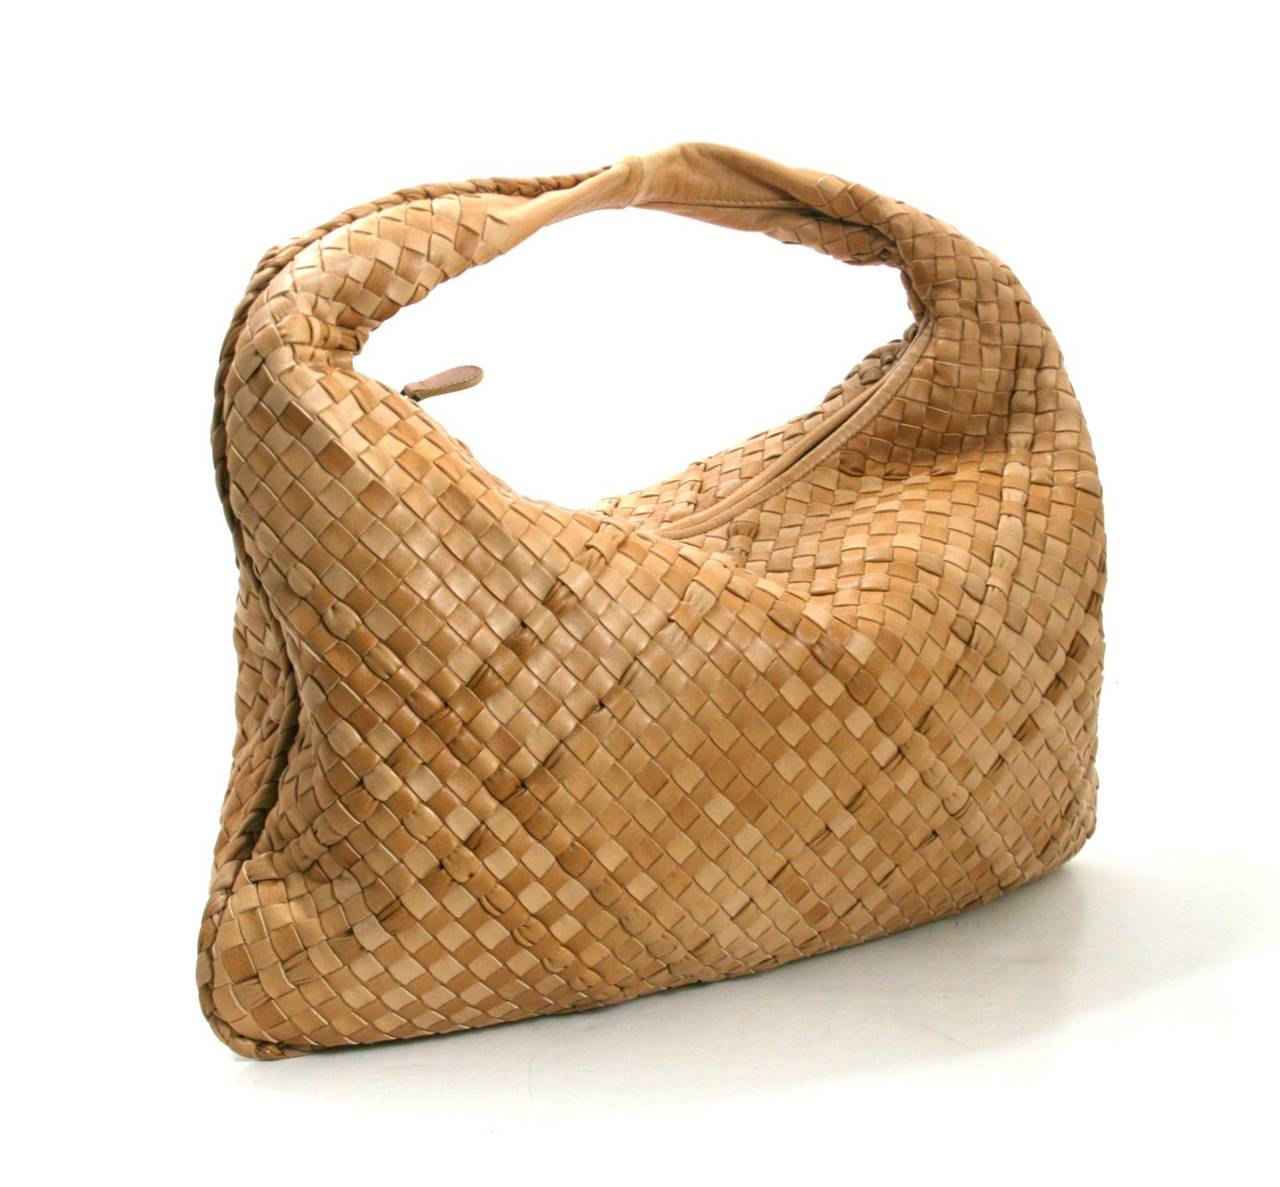 Bottega Veneta’s Paille Leather Large Veneta is a rare limited edition in mint condition. The neutral color and classic silhouette is a beautiful addition to any collection.  2010 retail price $2,250.00.
Warm variations of camel and beige lambskin